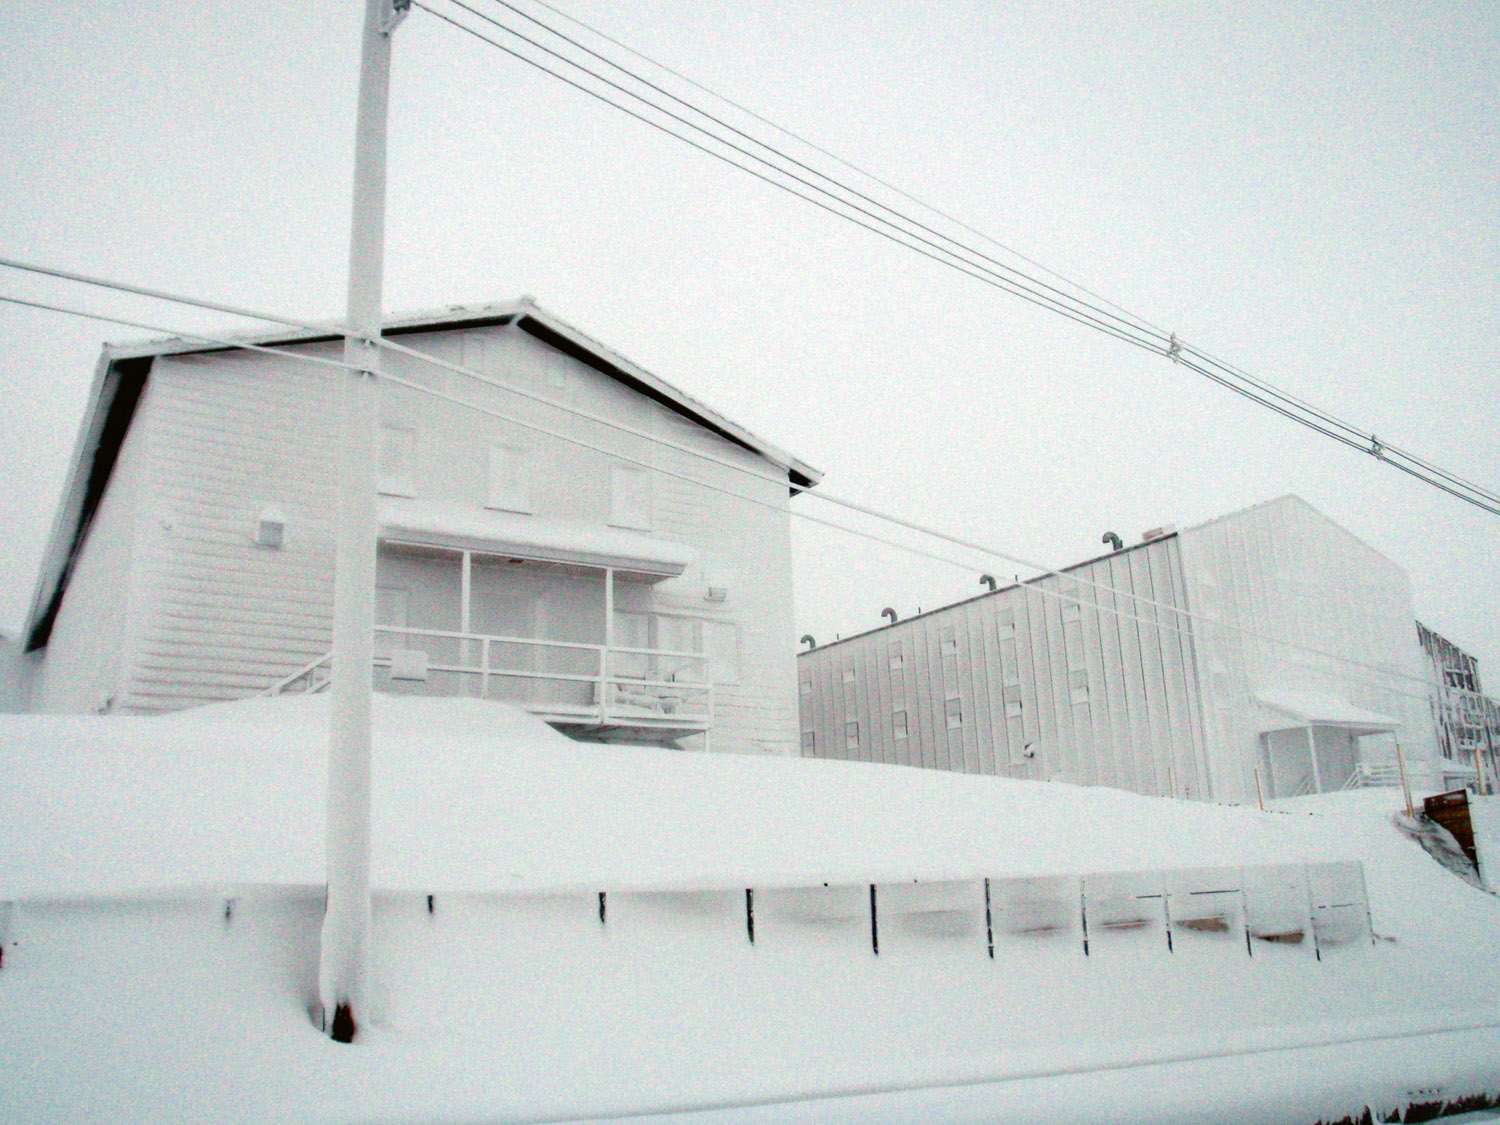 Snow Covered Buildings the Day After the Storm